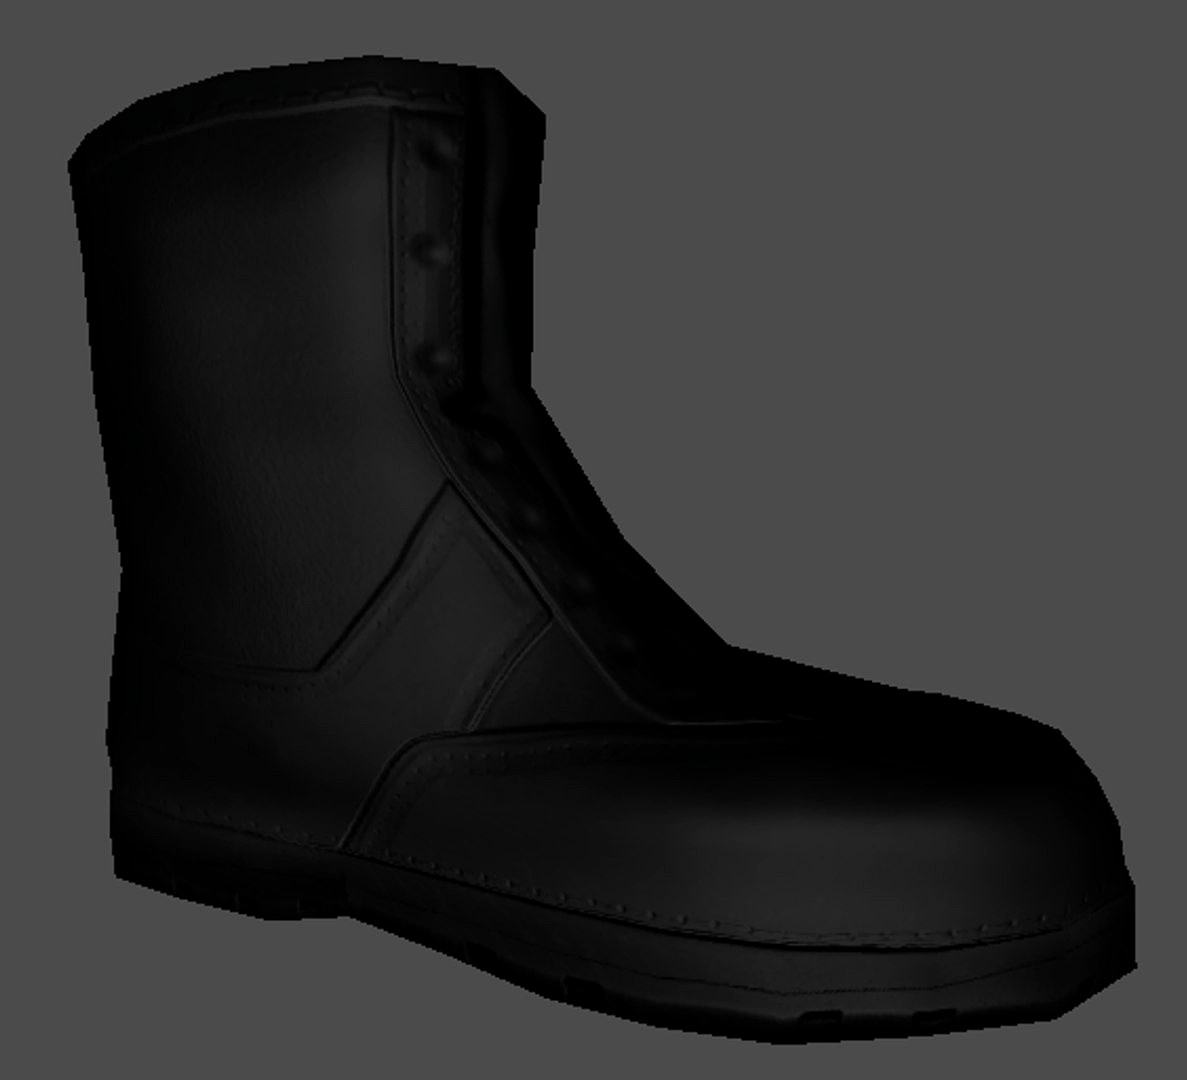 Lowpoly Boot Shoes